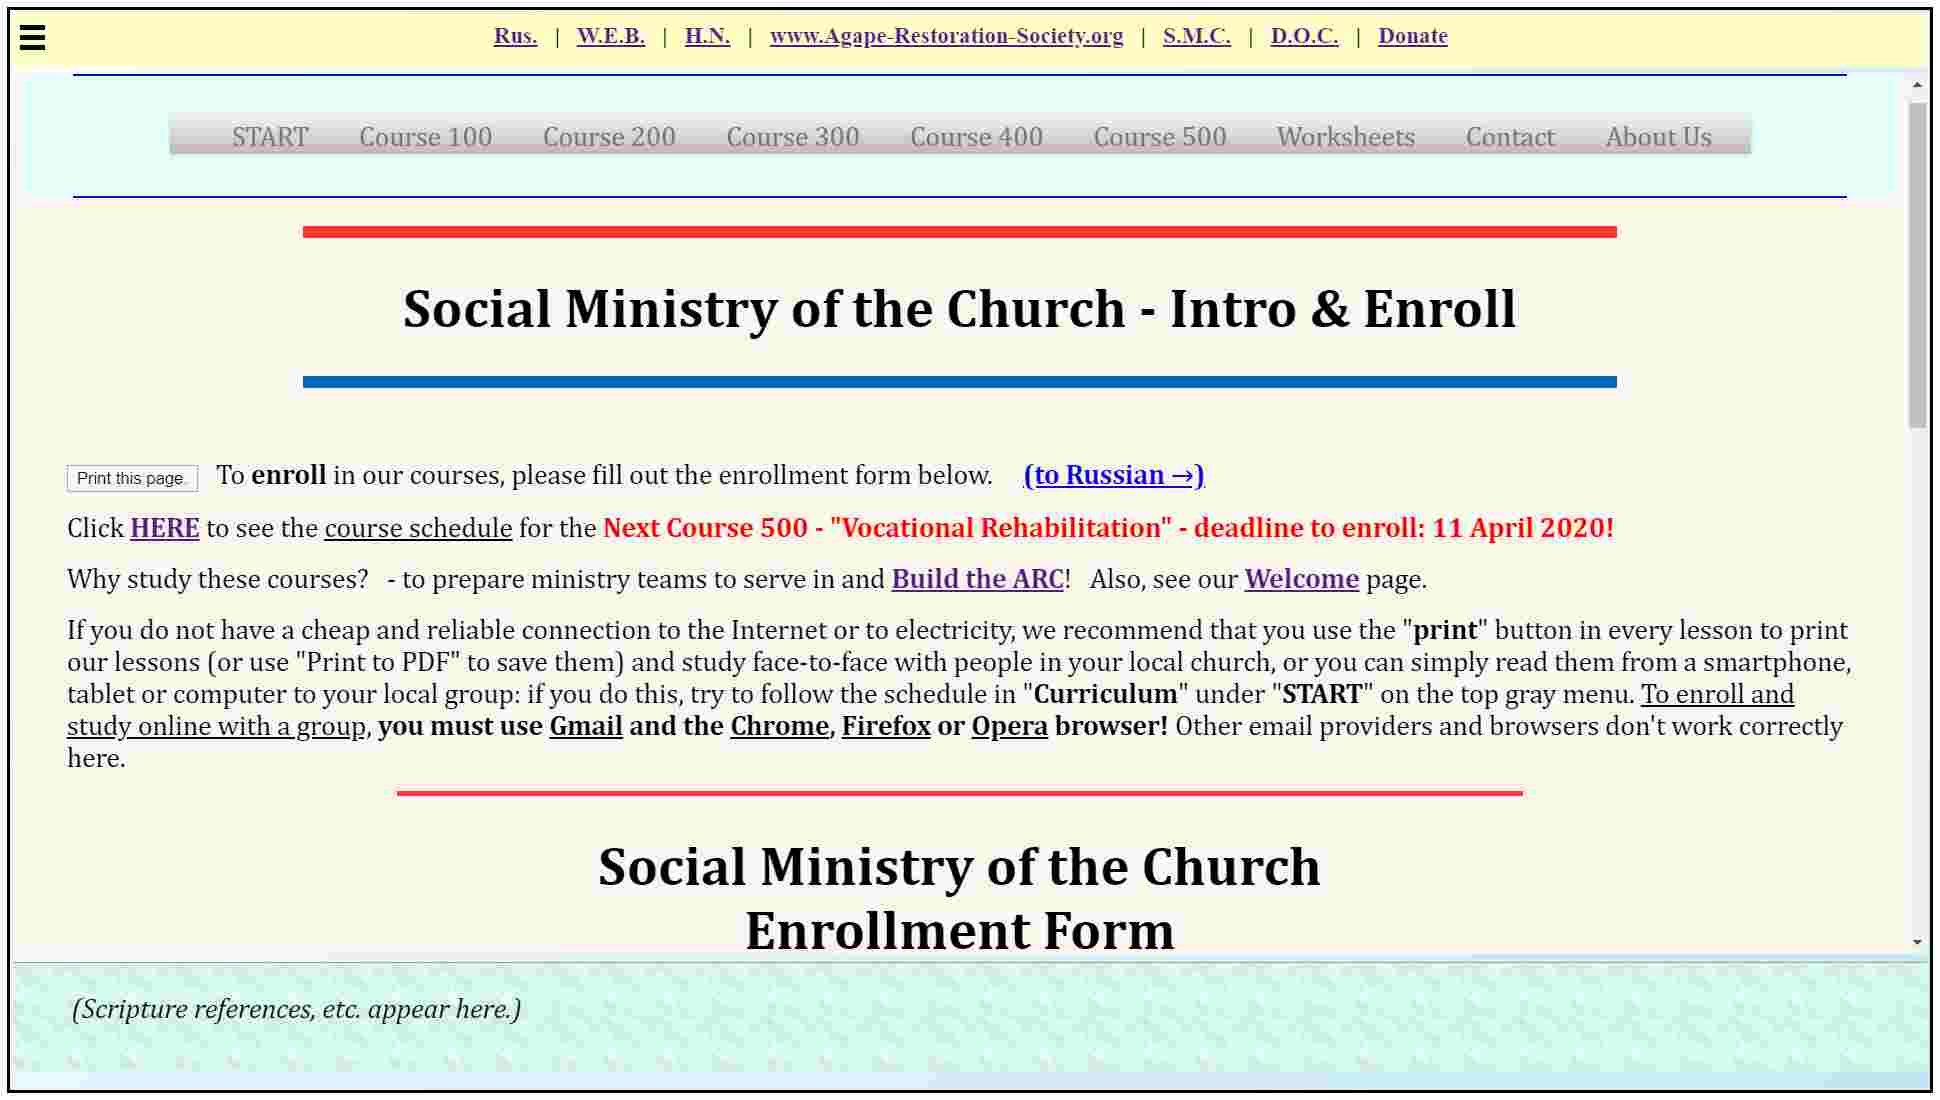 the Social Ministry of the Church